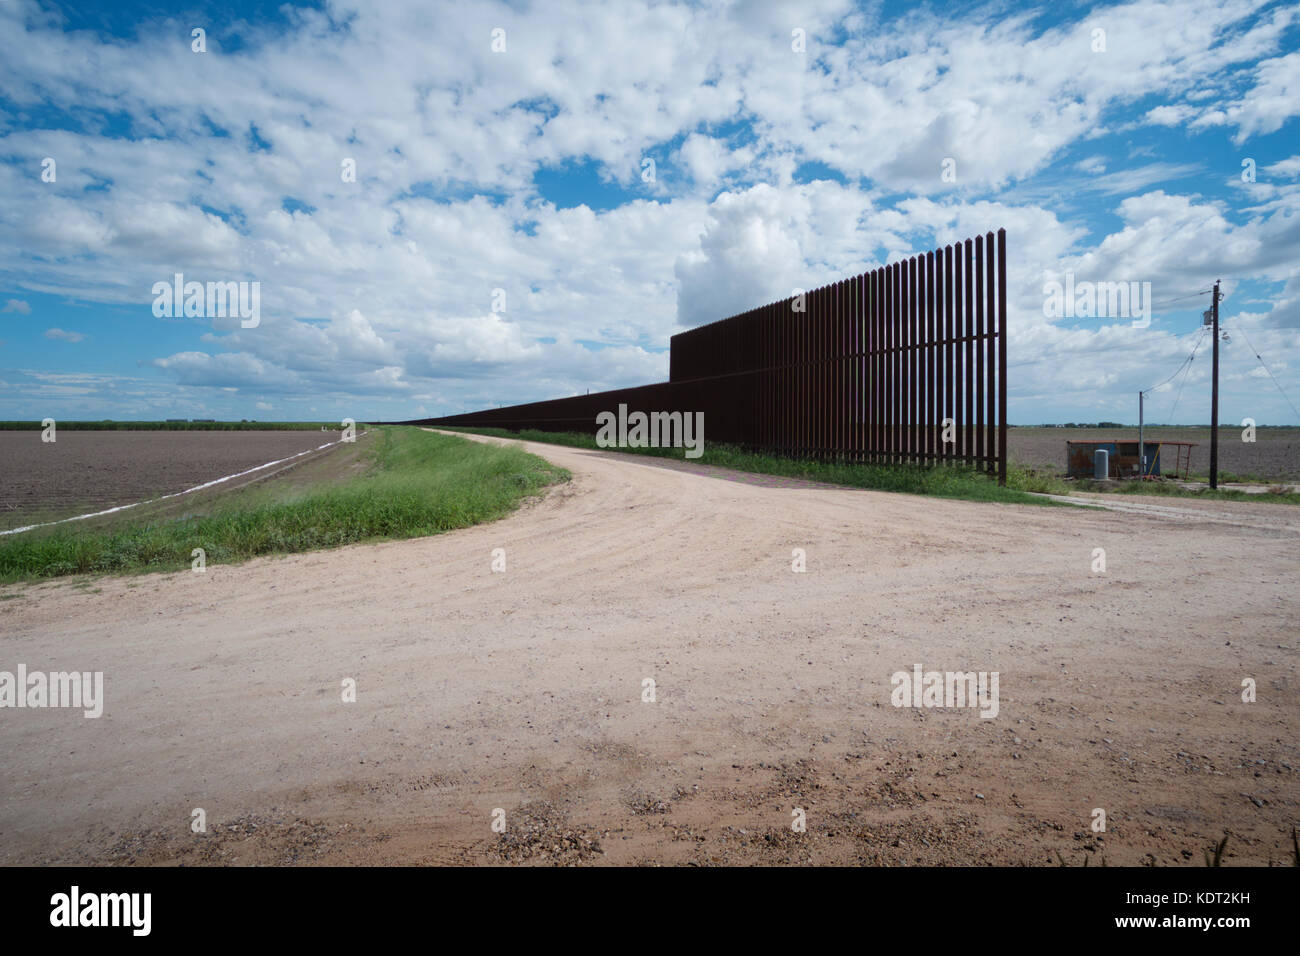 Texas border fence sits atop a dike near the Texas/Mexico border. This portion of the fence was built during the George W. Bush era. The fence and dik Stock Photo